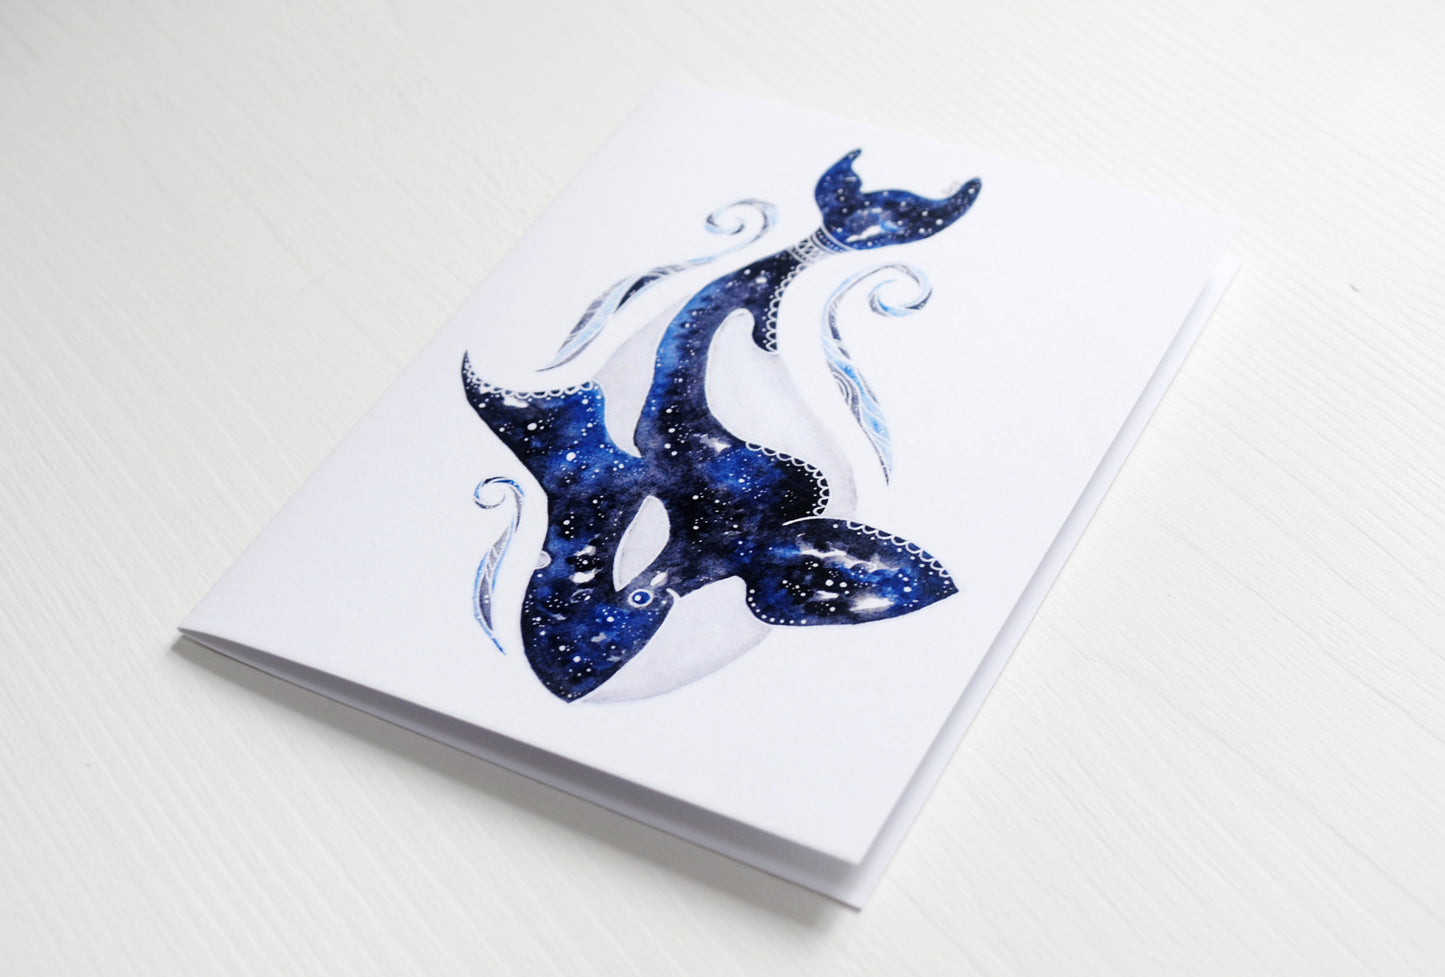 Orca Whale Greeting Card